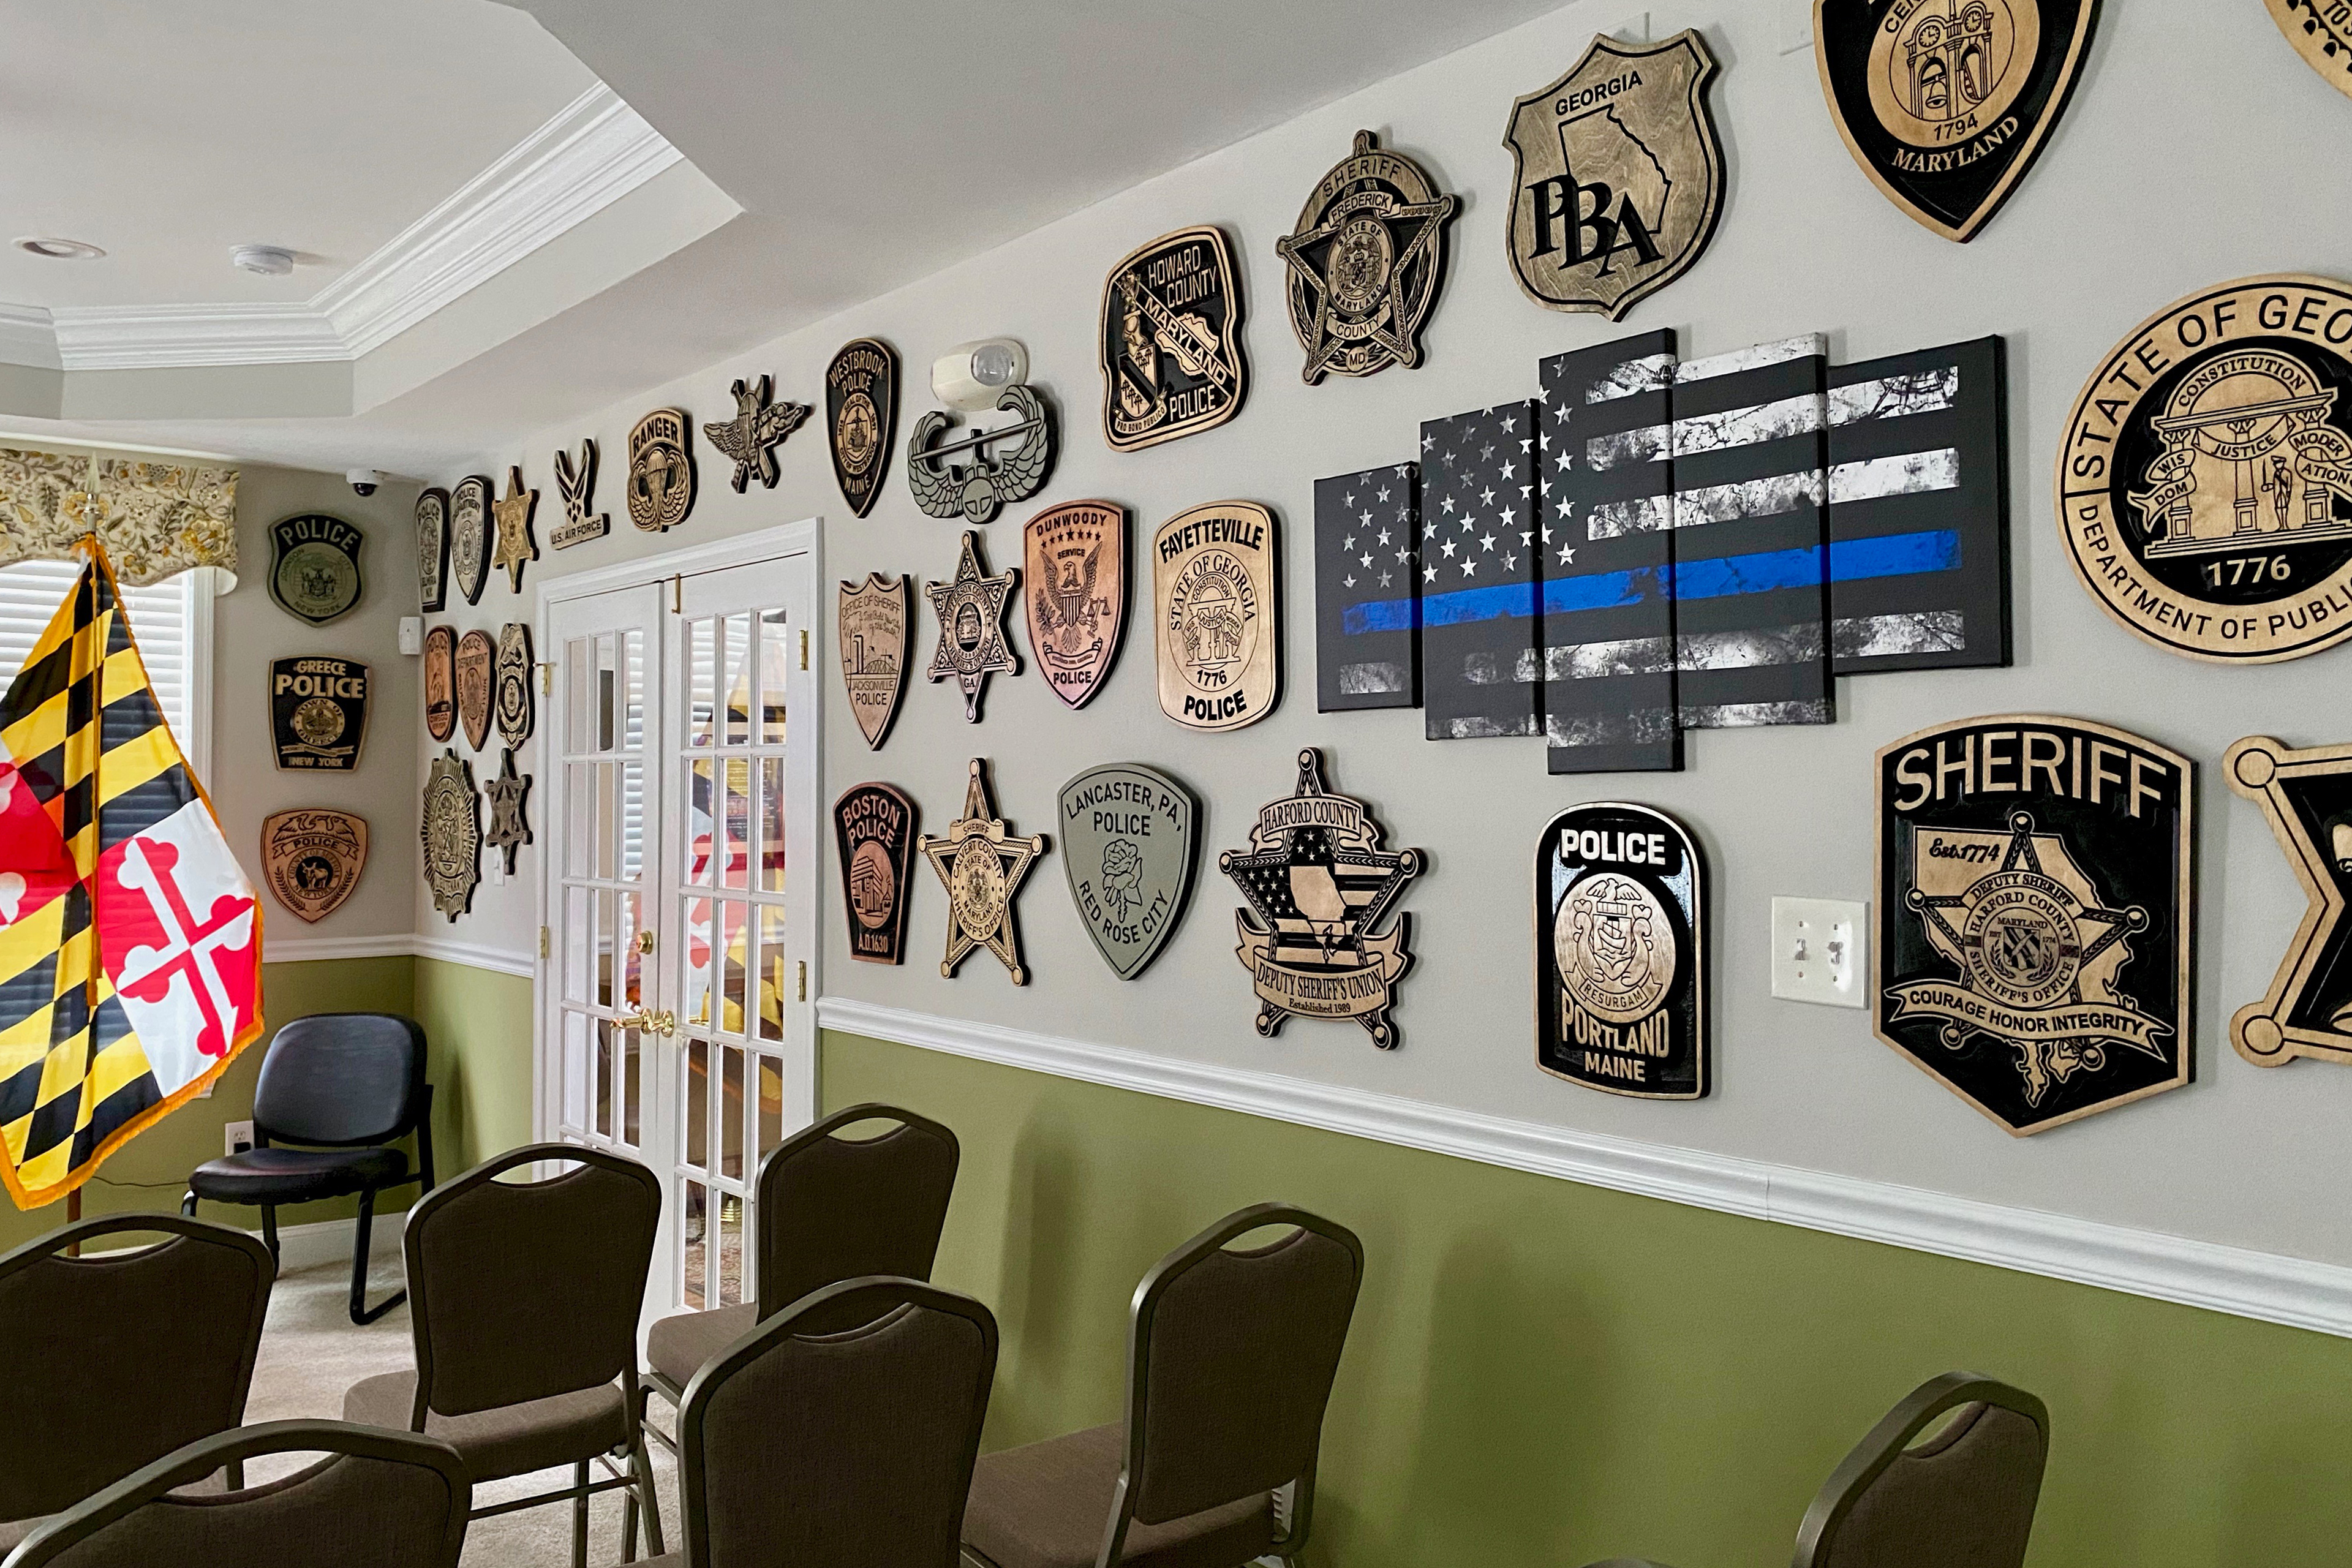 A photo shows a room with rows of chairs and walls that are decorated with plaques dedicated to law enforcement.